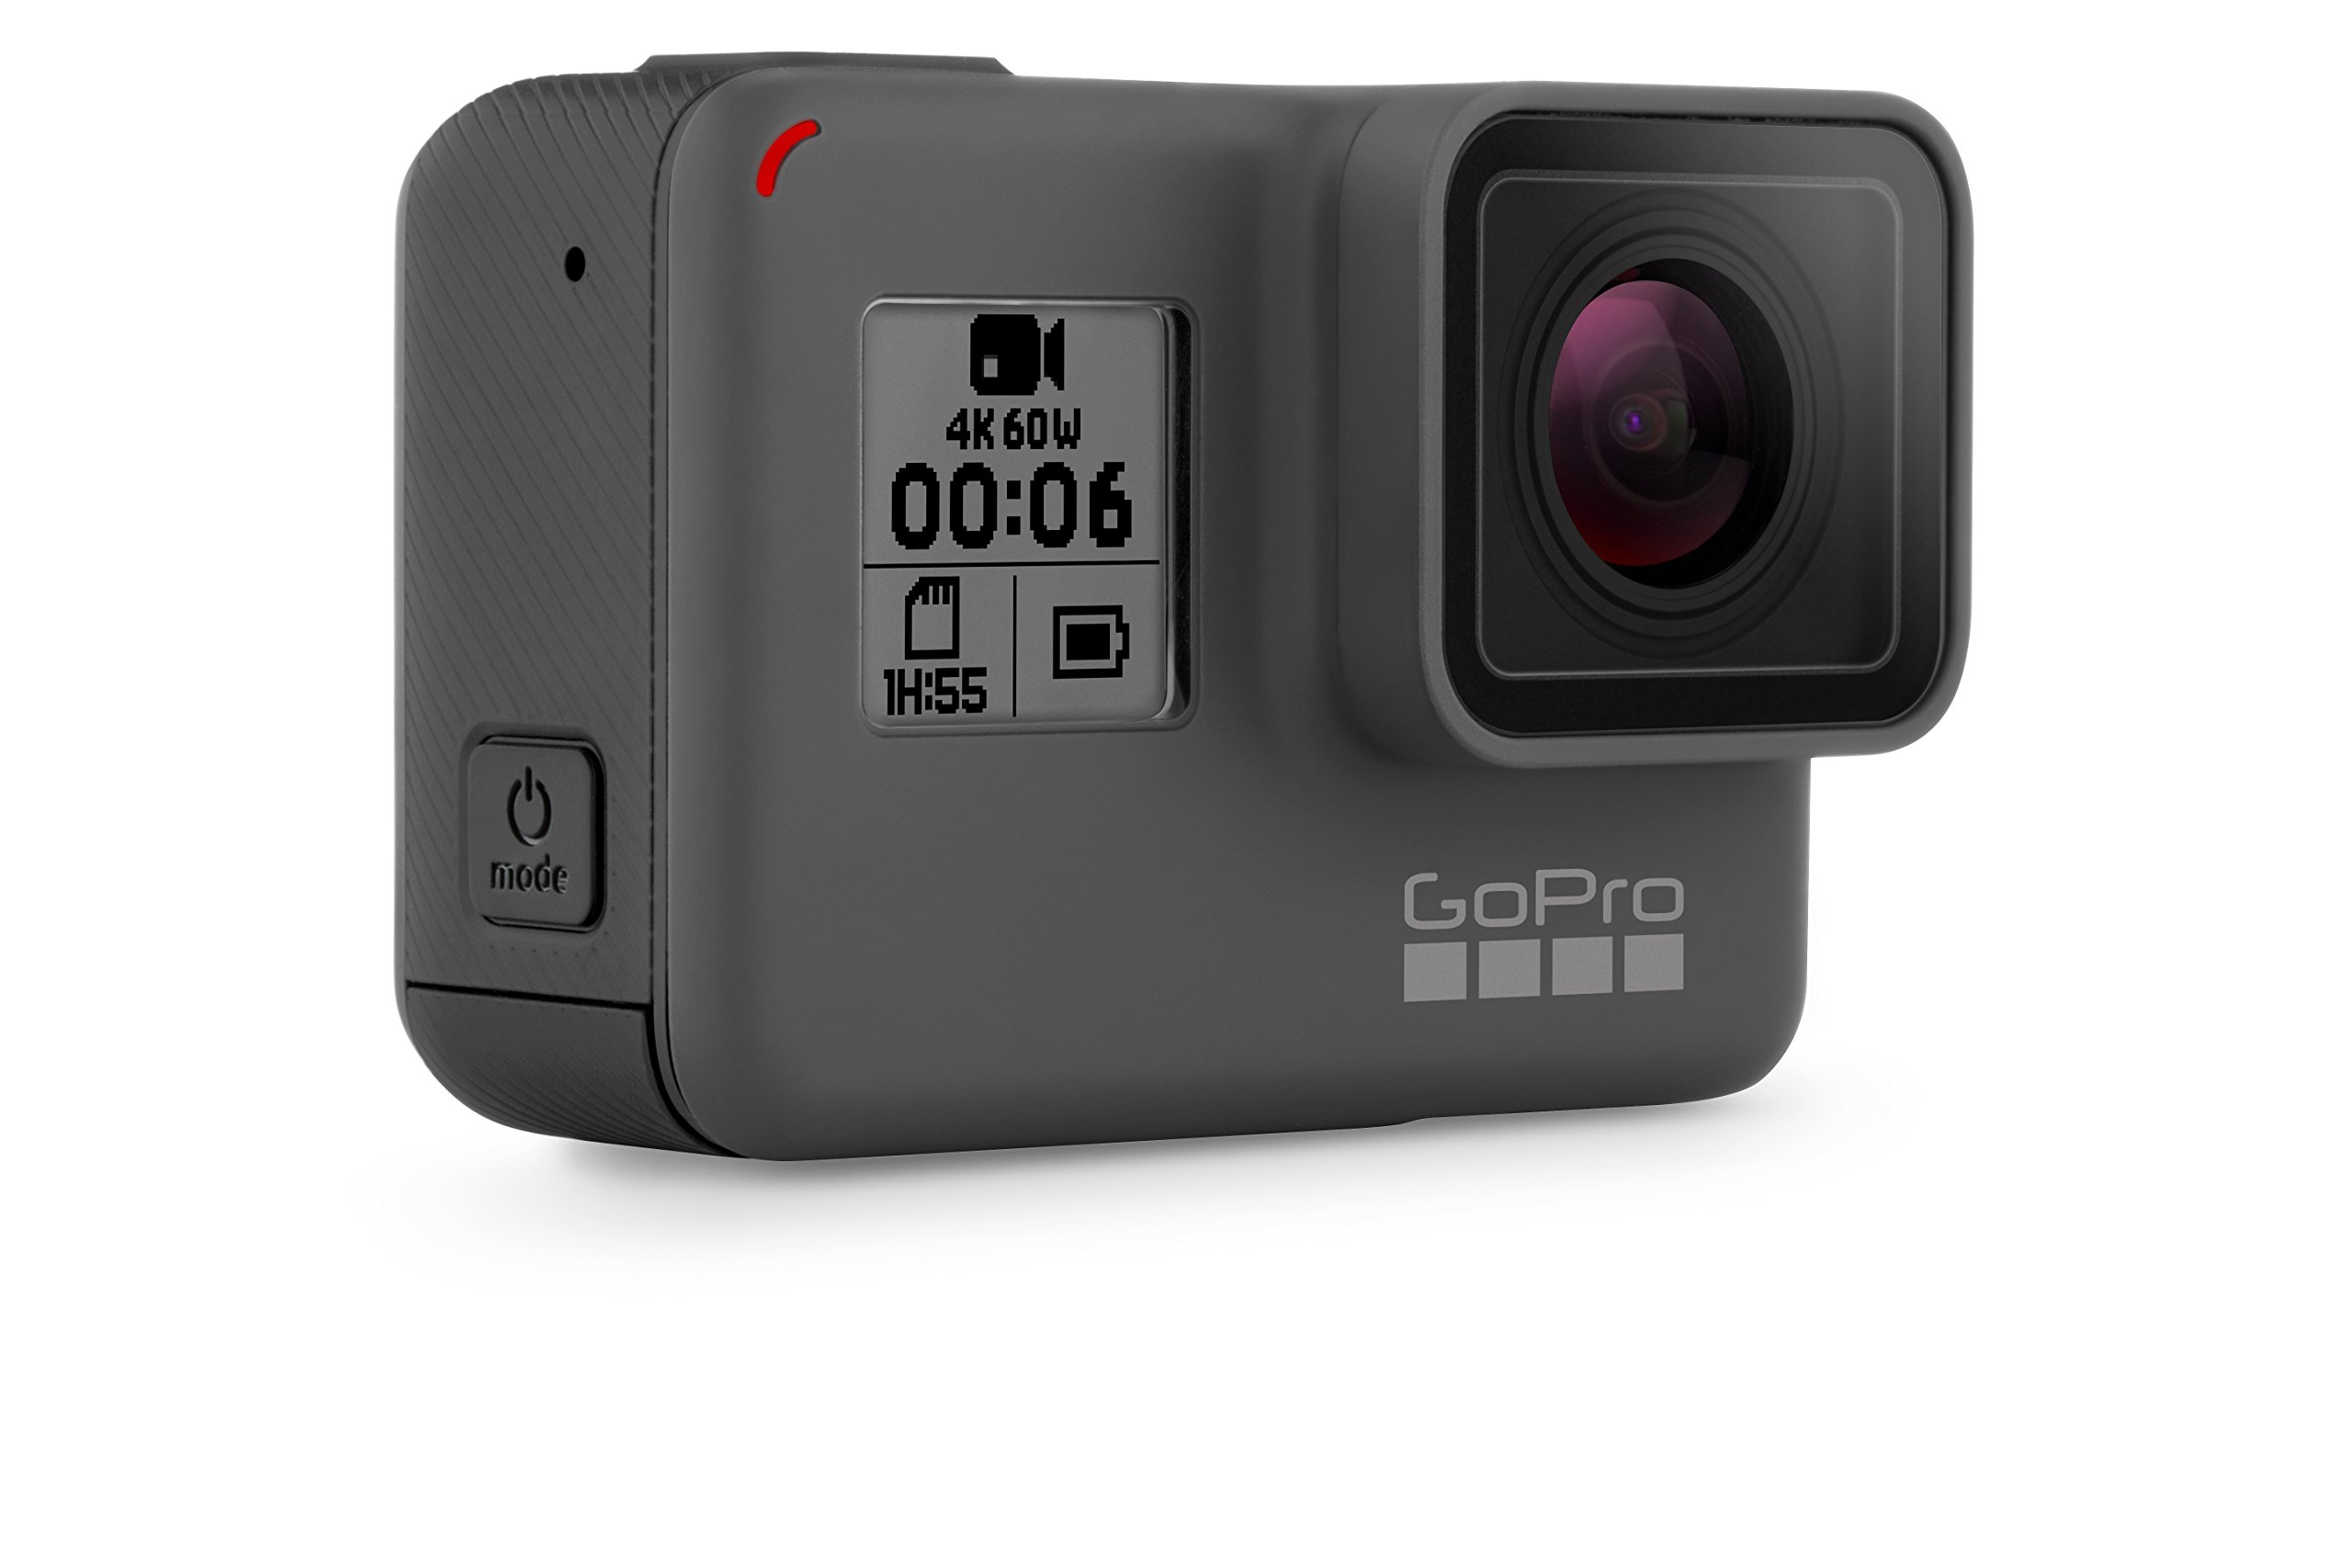 GoPro HERO6 Black — Waterproof Digital Action Camera for Travel with Touch Screen 4K HD Video 12MP Photos